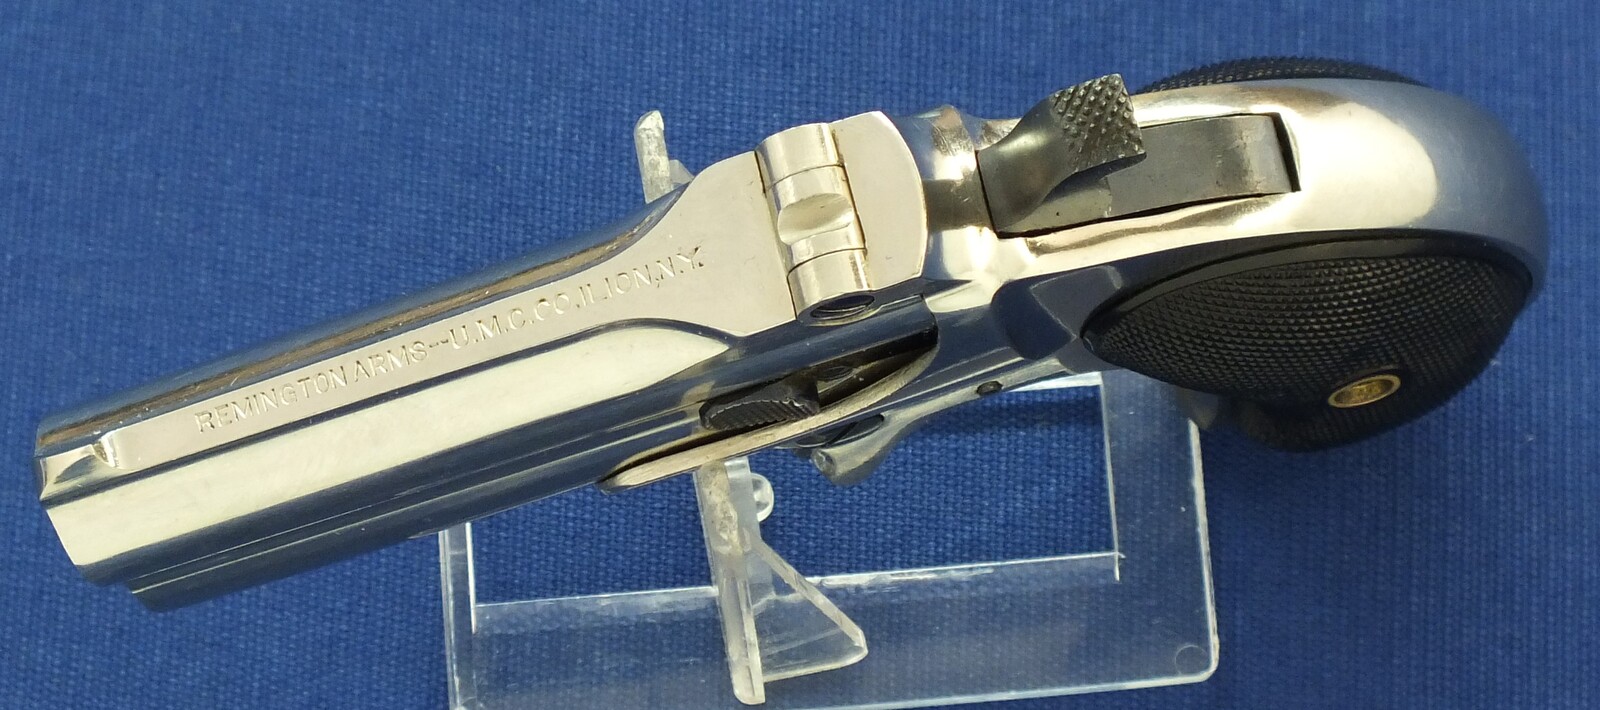 A fine antique American Nickel Plated Remington Double Deringer Type III, a.k.a. Model No 4. Caliber 41 rimfire. In mint condition. Price 2.650 euro.